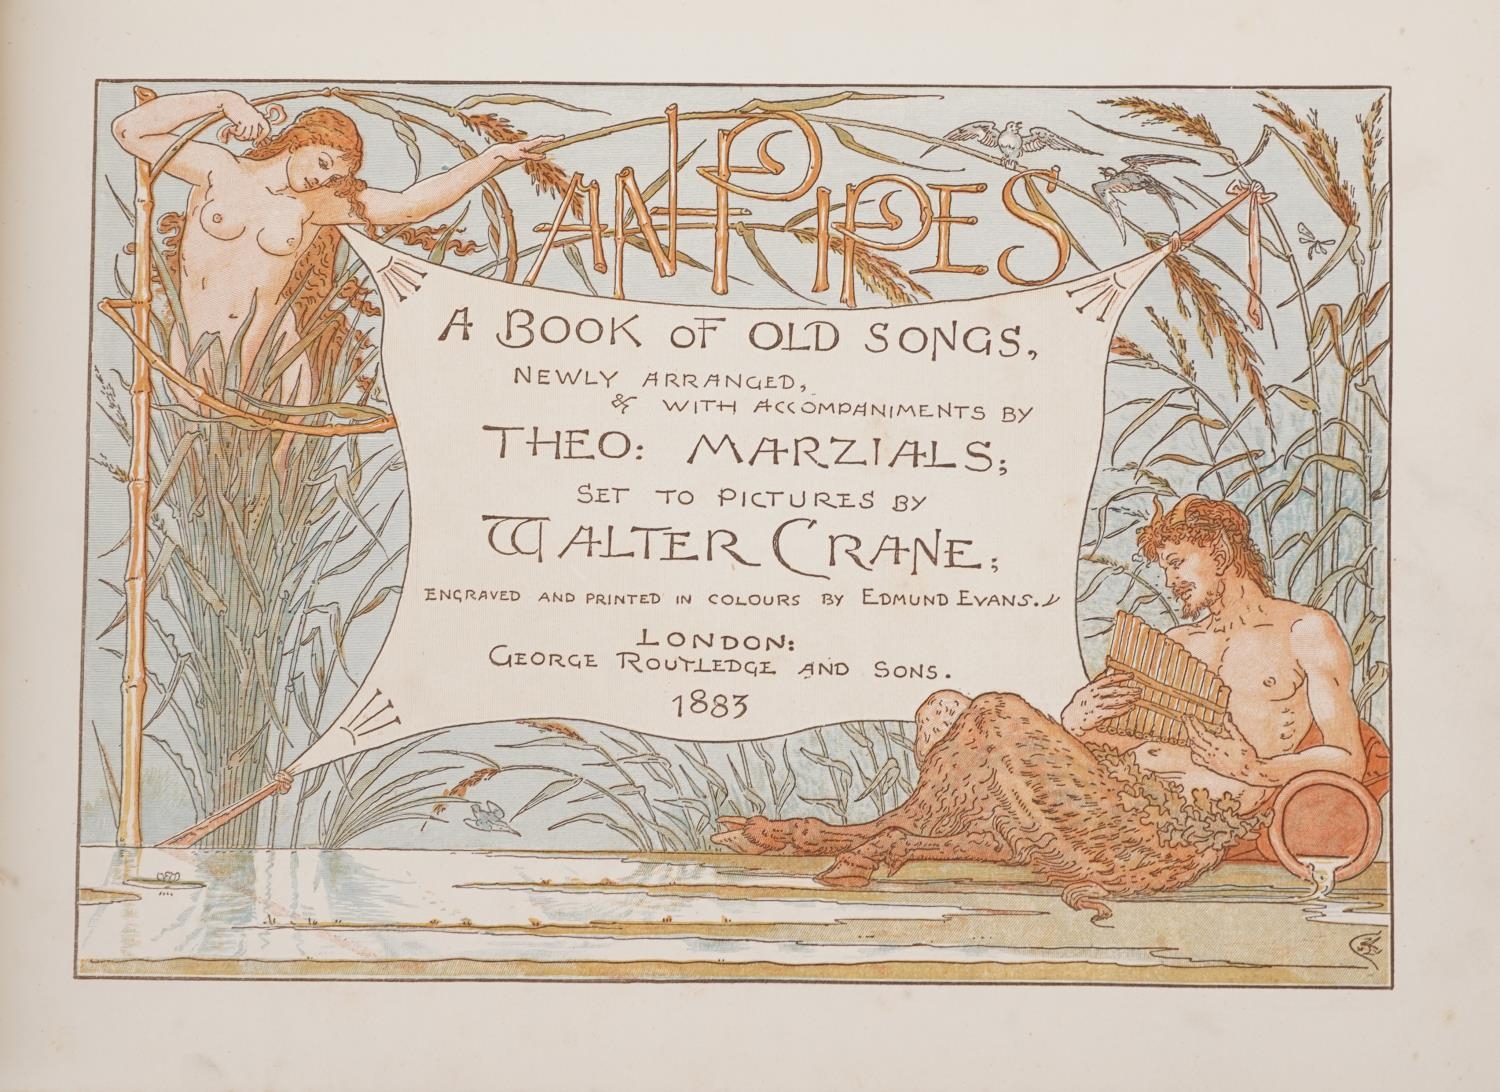 Pan Pipes, hardback book by Walter Crane published London George Routledge & Sons 1883 - Image 3 of 4